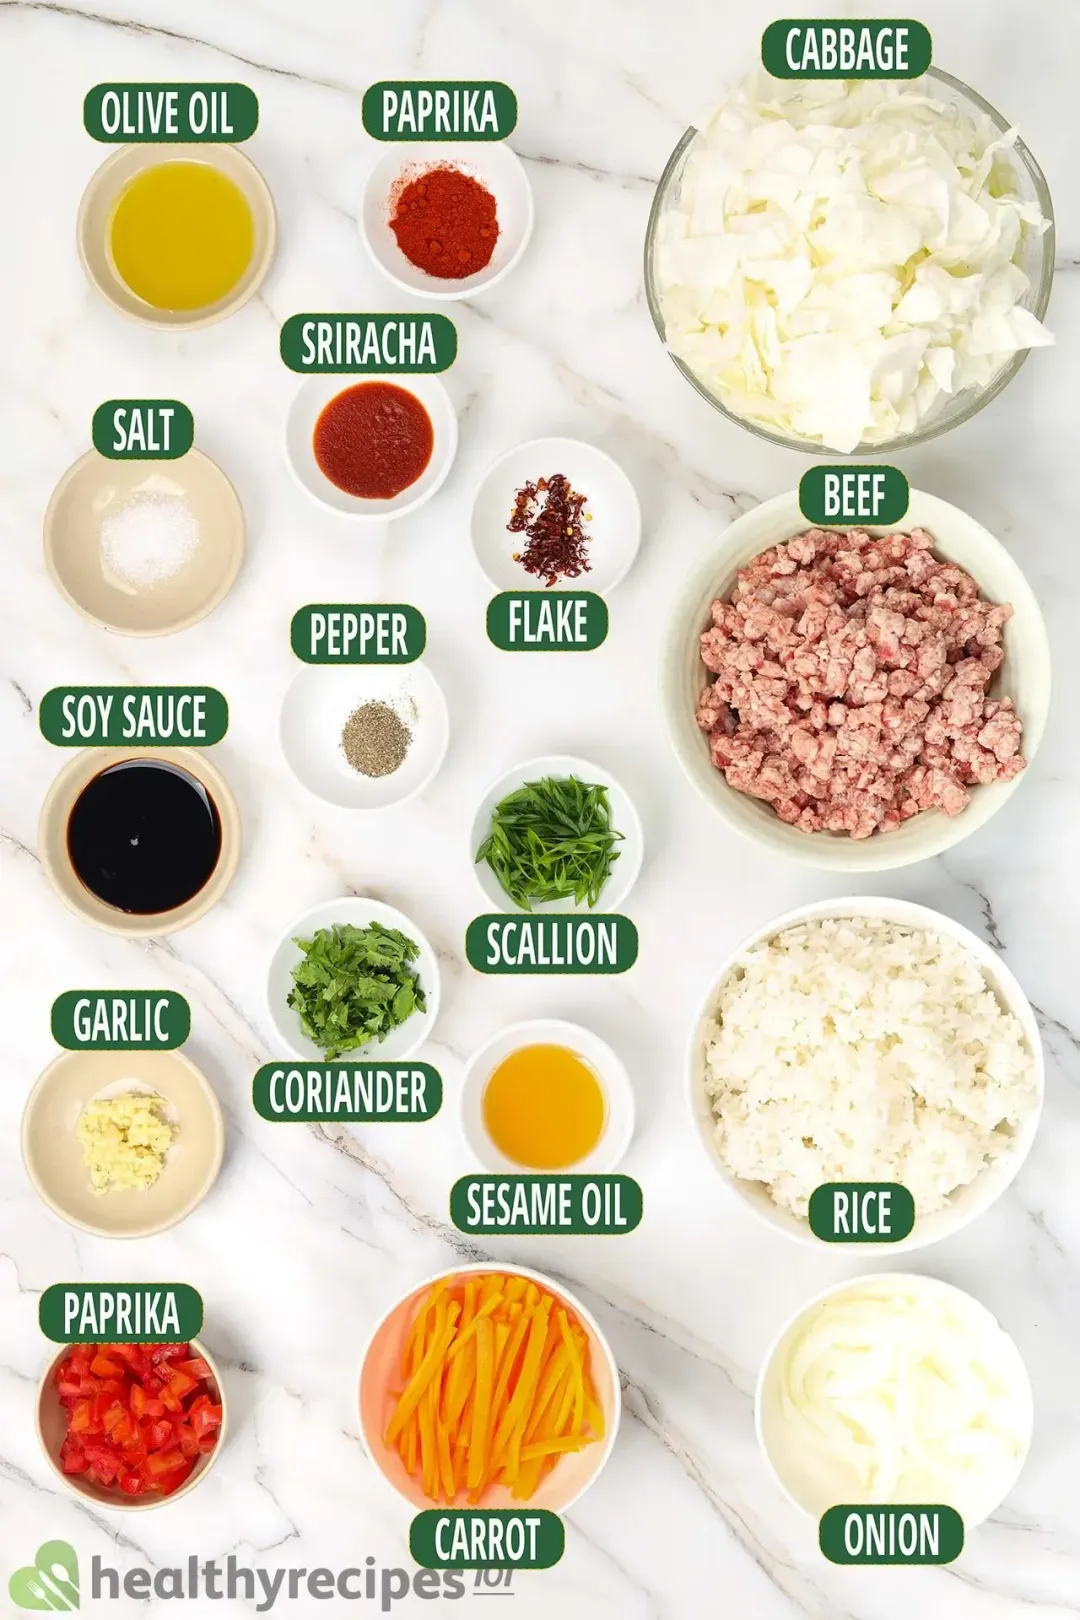 Ground Beef and Cabbage Ingredients